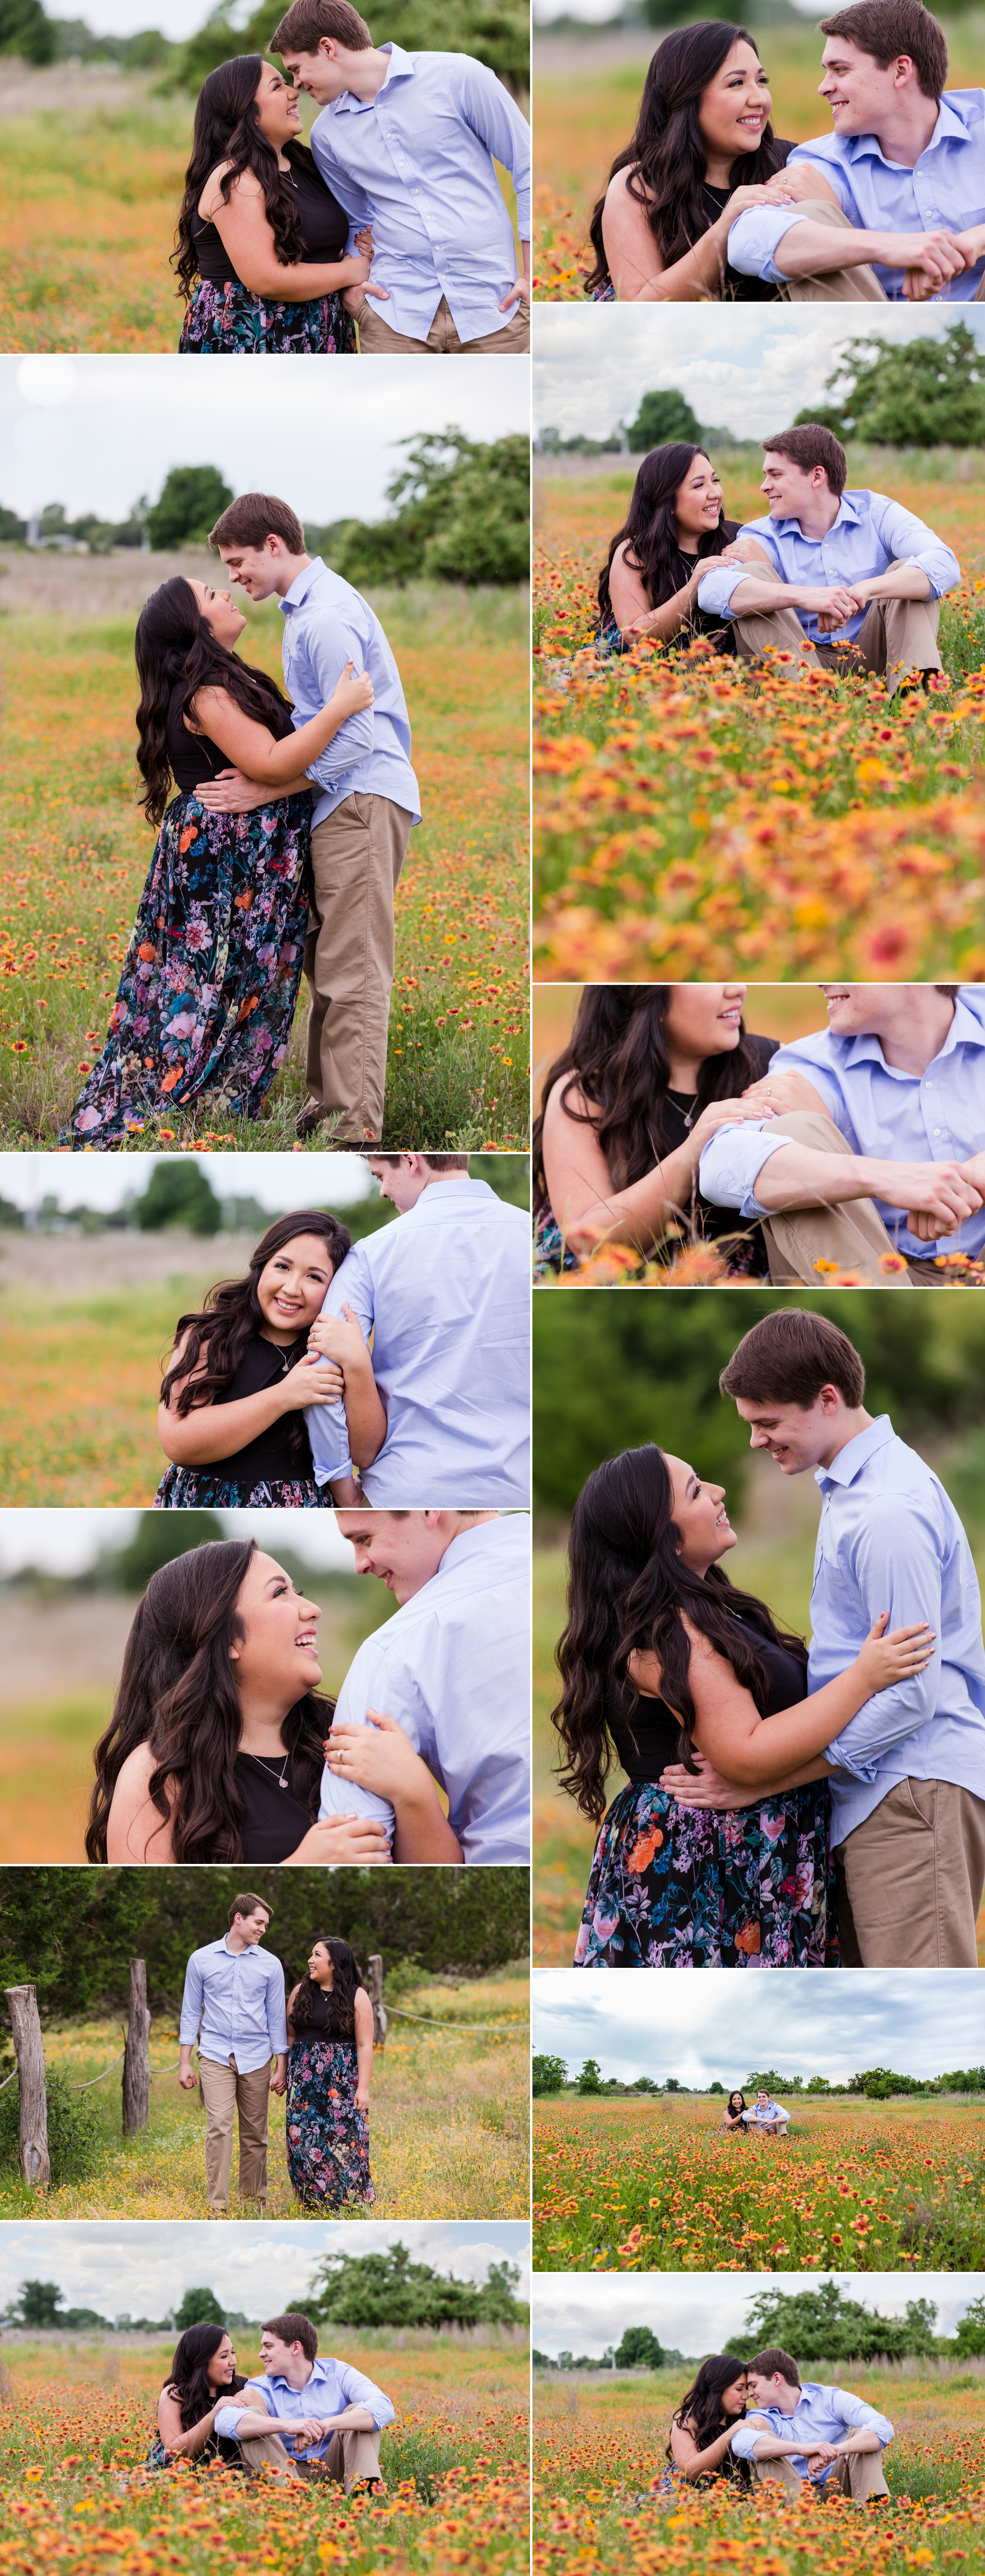 Spring Engagement Session filled with Wildflowers in San Antonio, TX by Dawn Elizabeth Studios